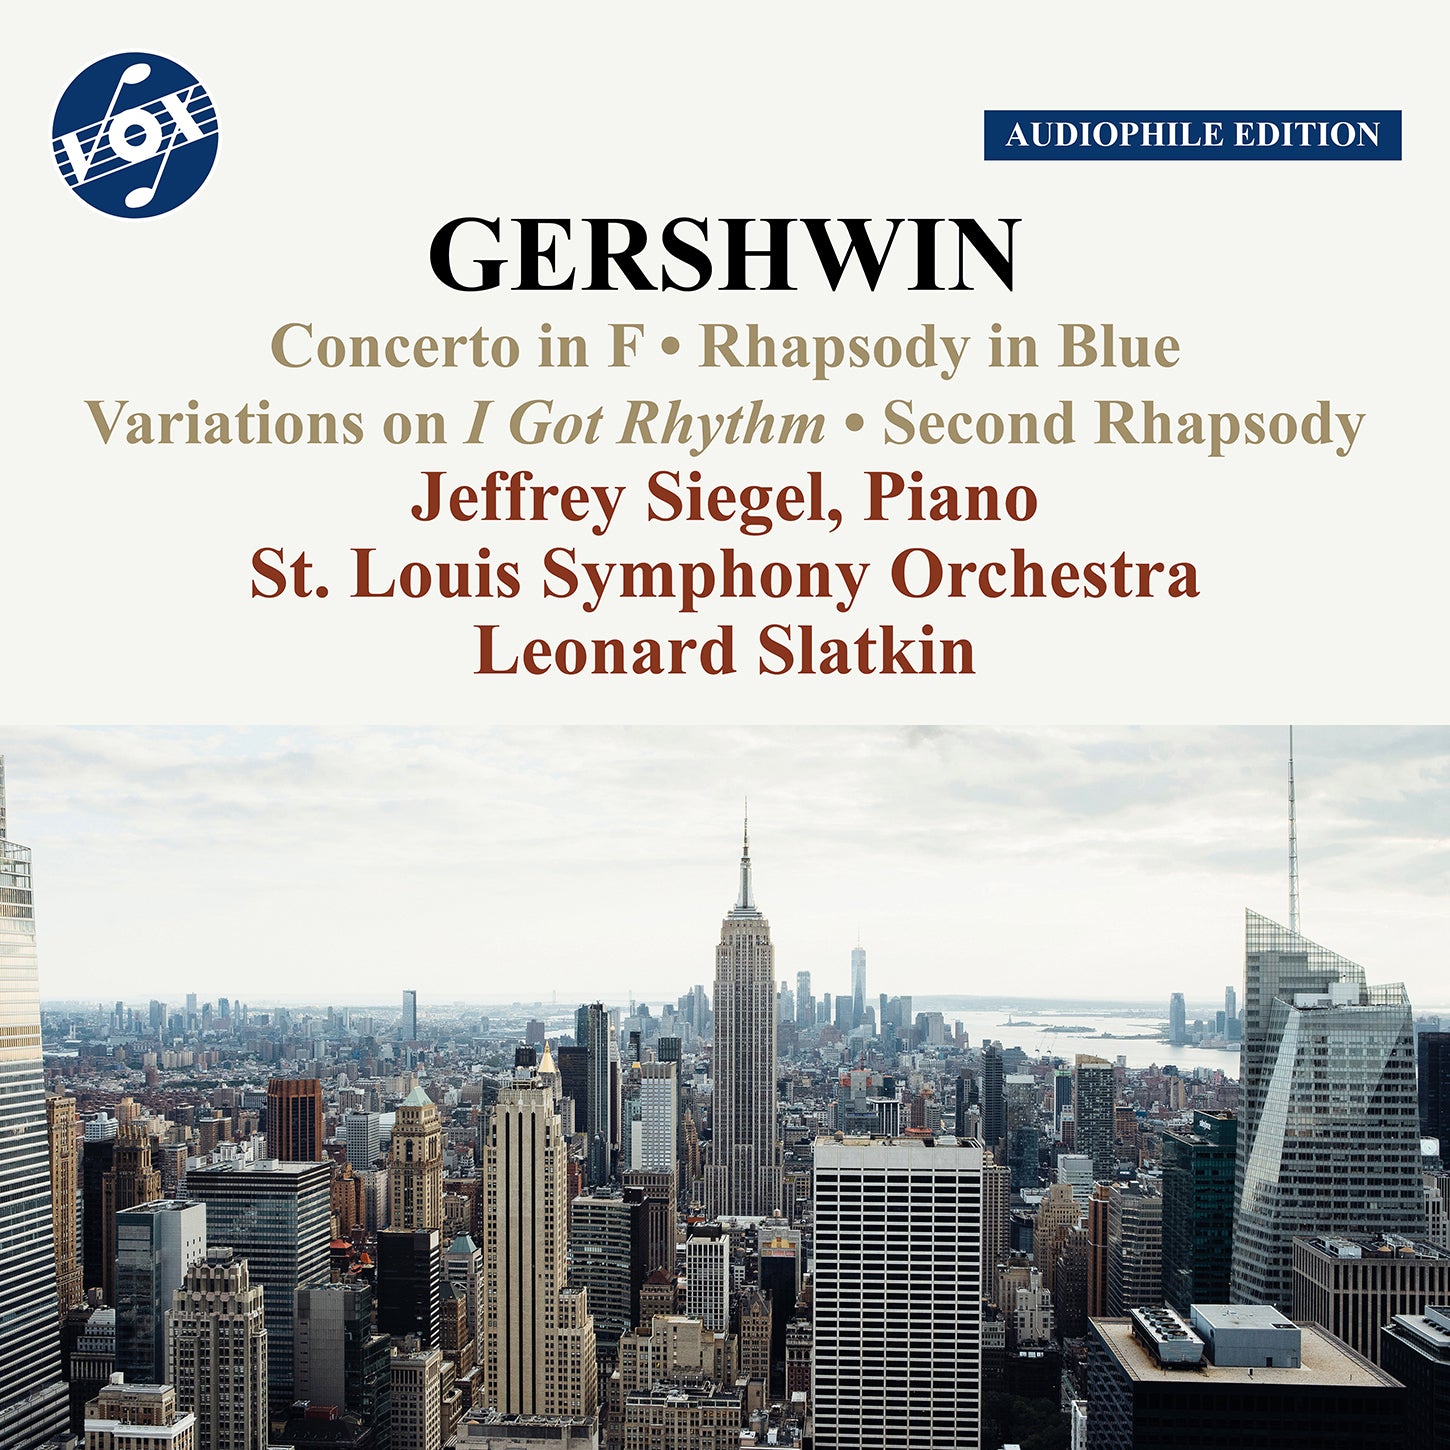 Gershwin: Works for Orchestra & Piano with Orchestra / Siegel, Slatkin, St. Louis Symphony